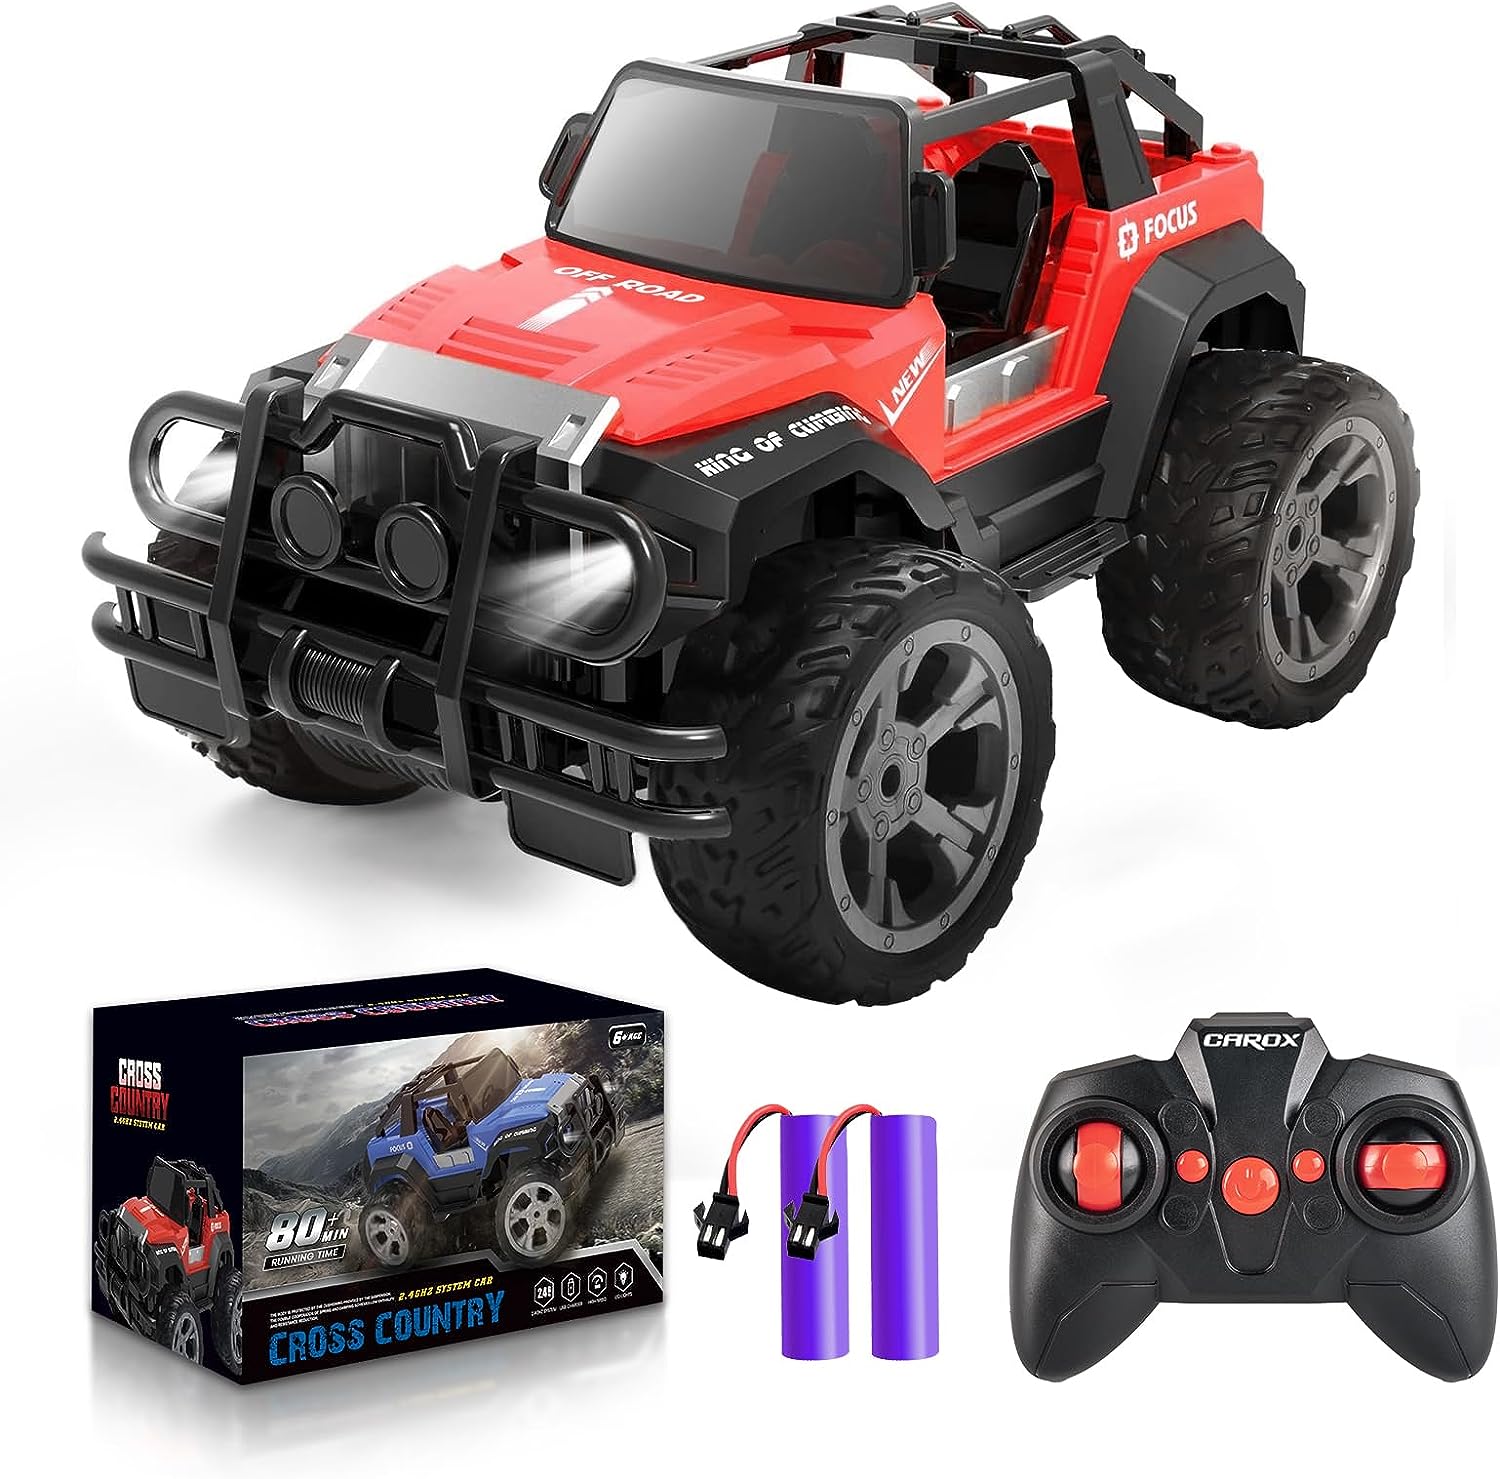 Carox Remote Control Car: The Ultimate Toy for Boys and Girls